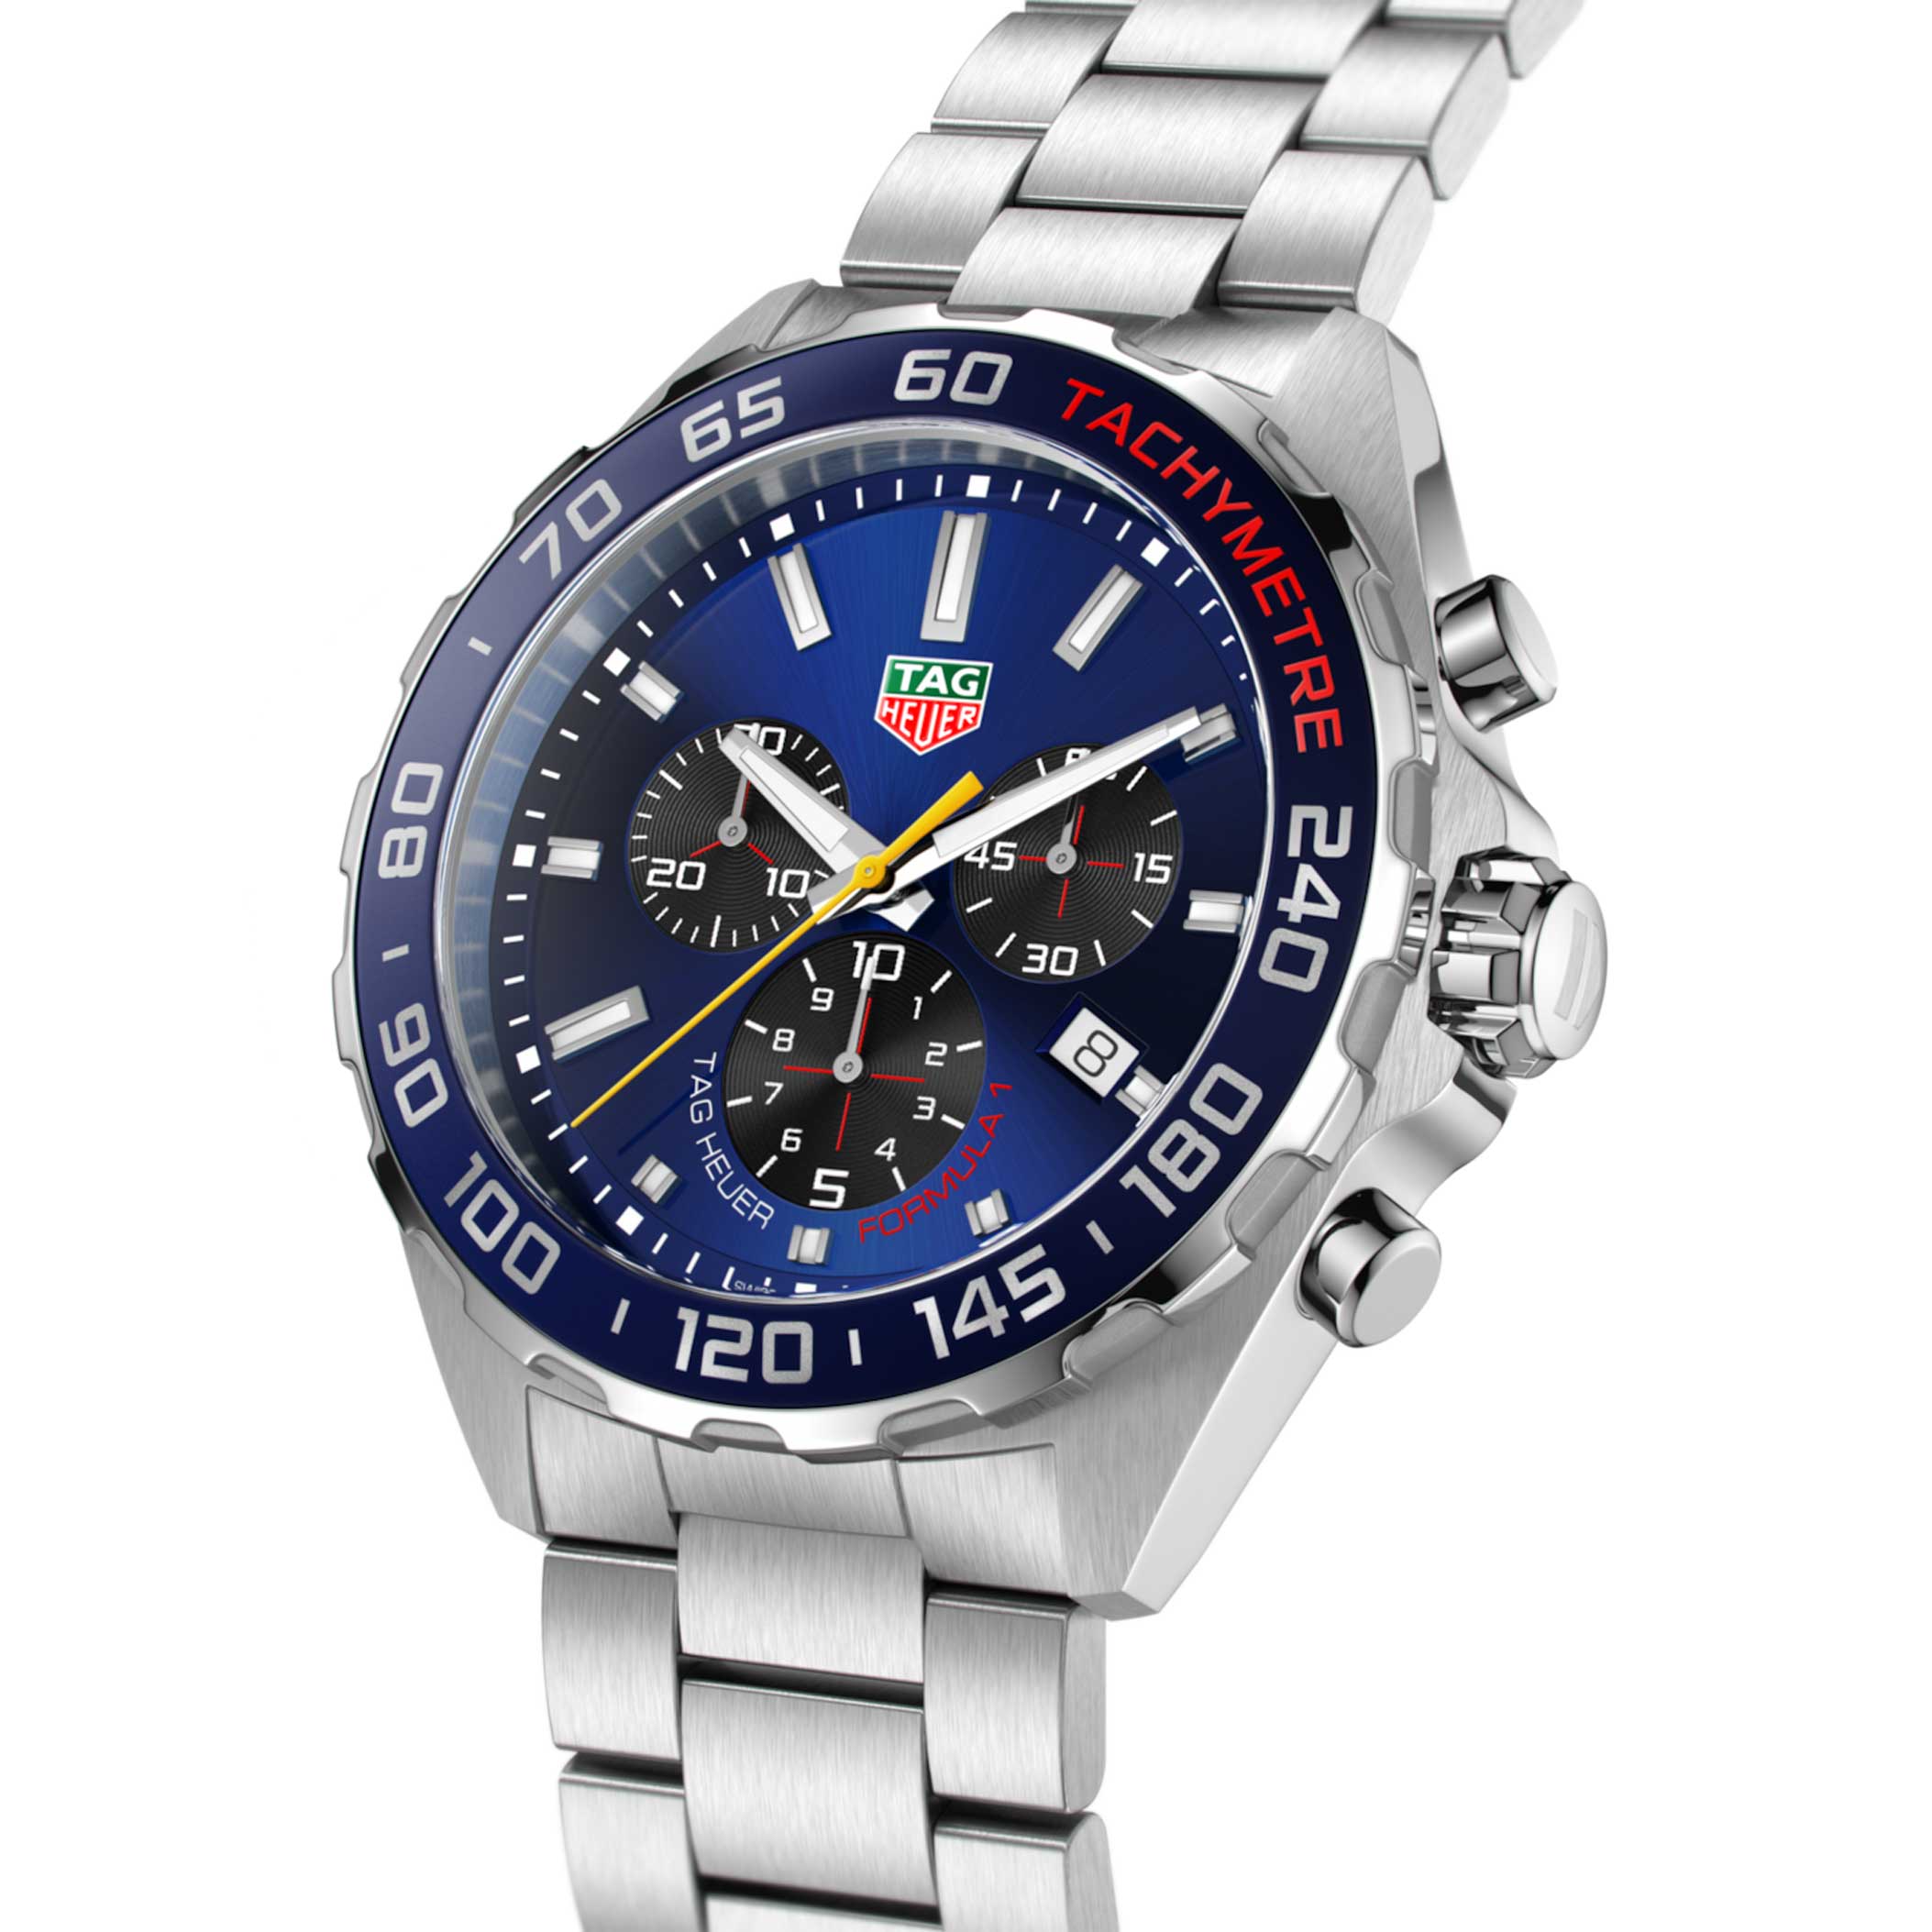 Tag Heuer Red Bull - www.inf-inet.com